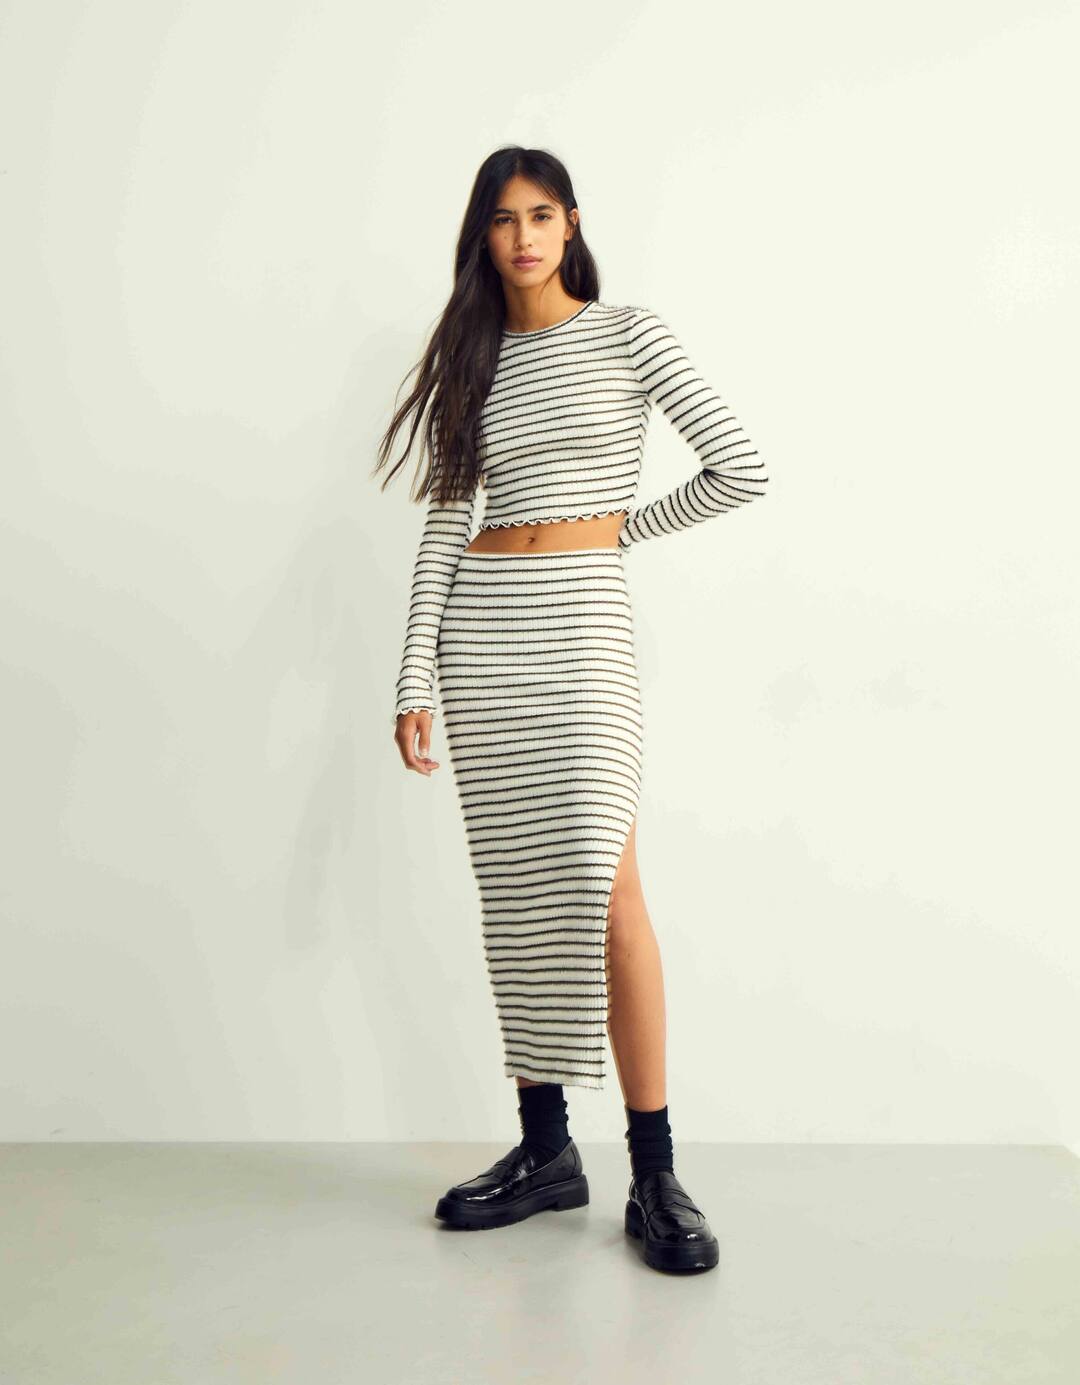 Striped skirt and sweater set